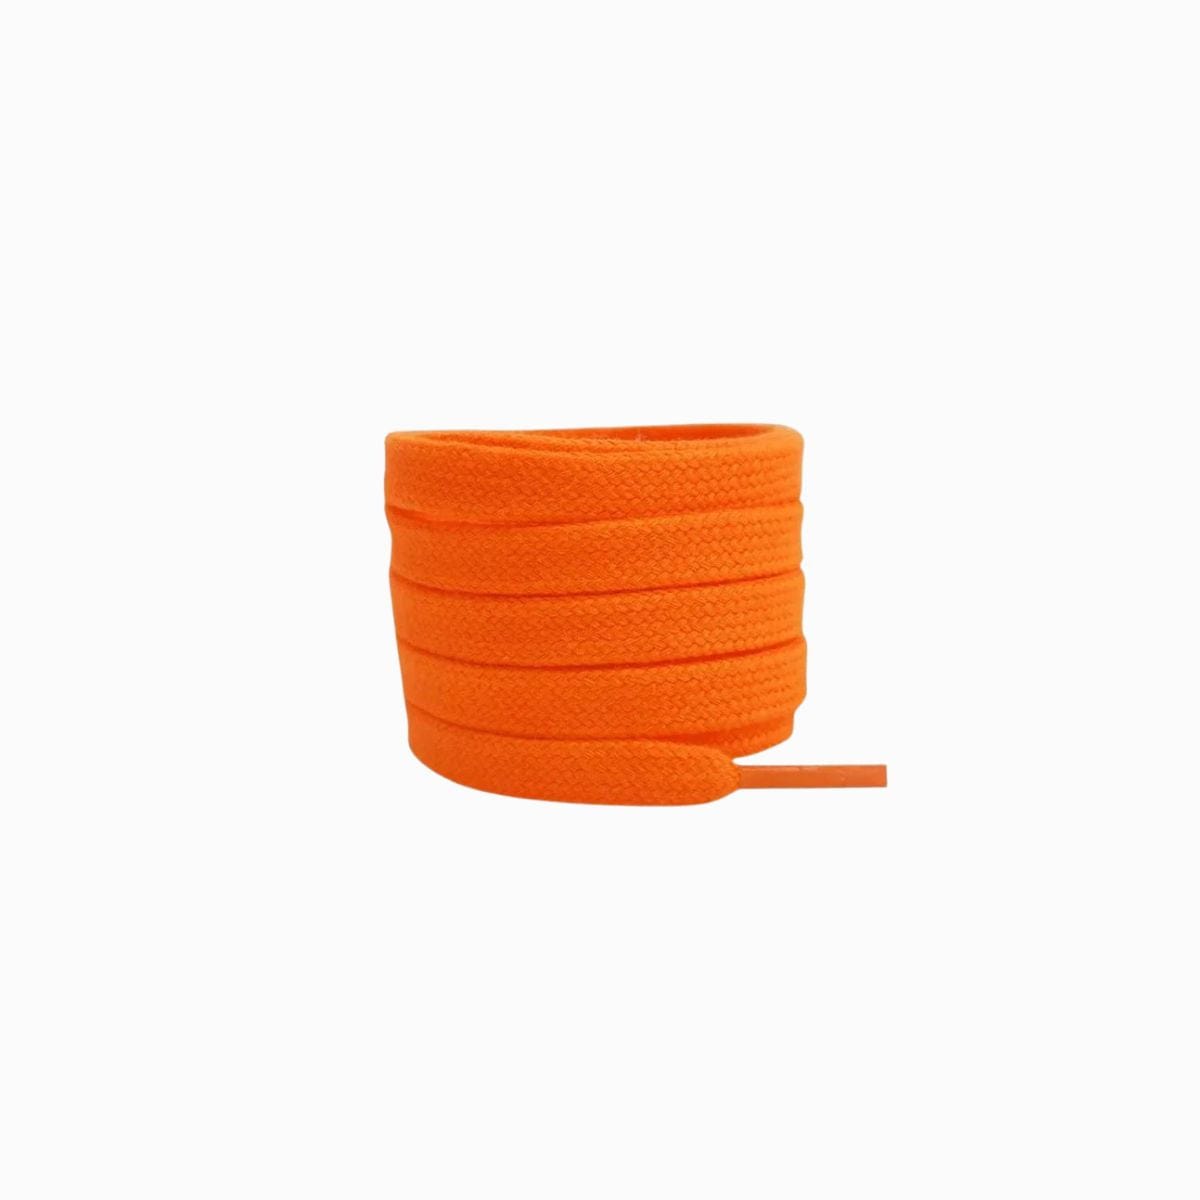 Orange Replacement Adidas Shoe Laces for Adidas Samba OG Sneakers by Kicks Shoelaces